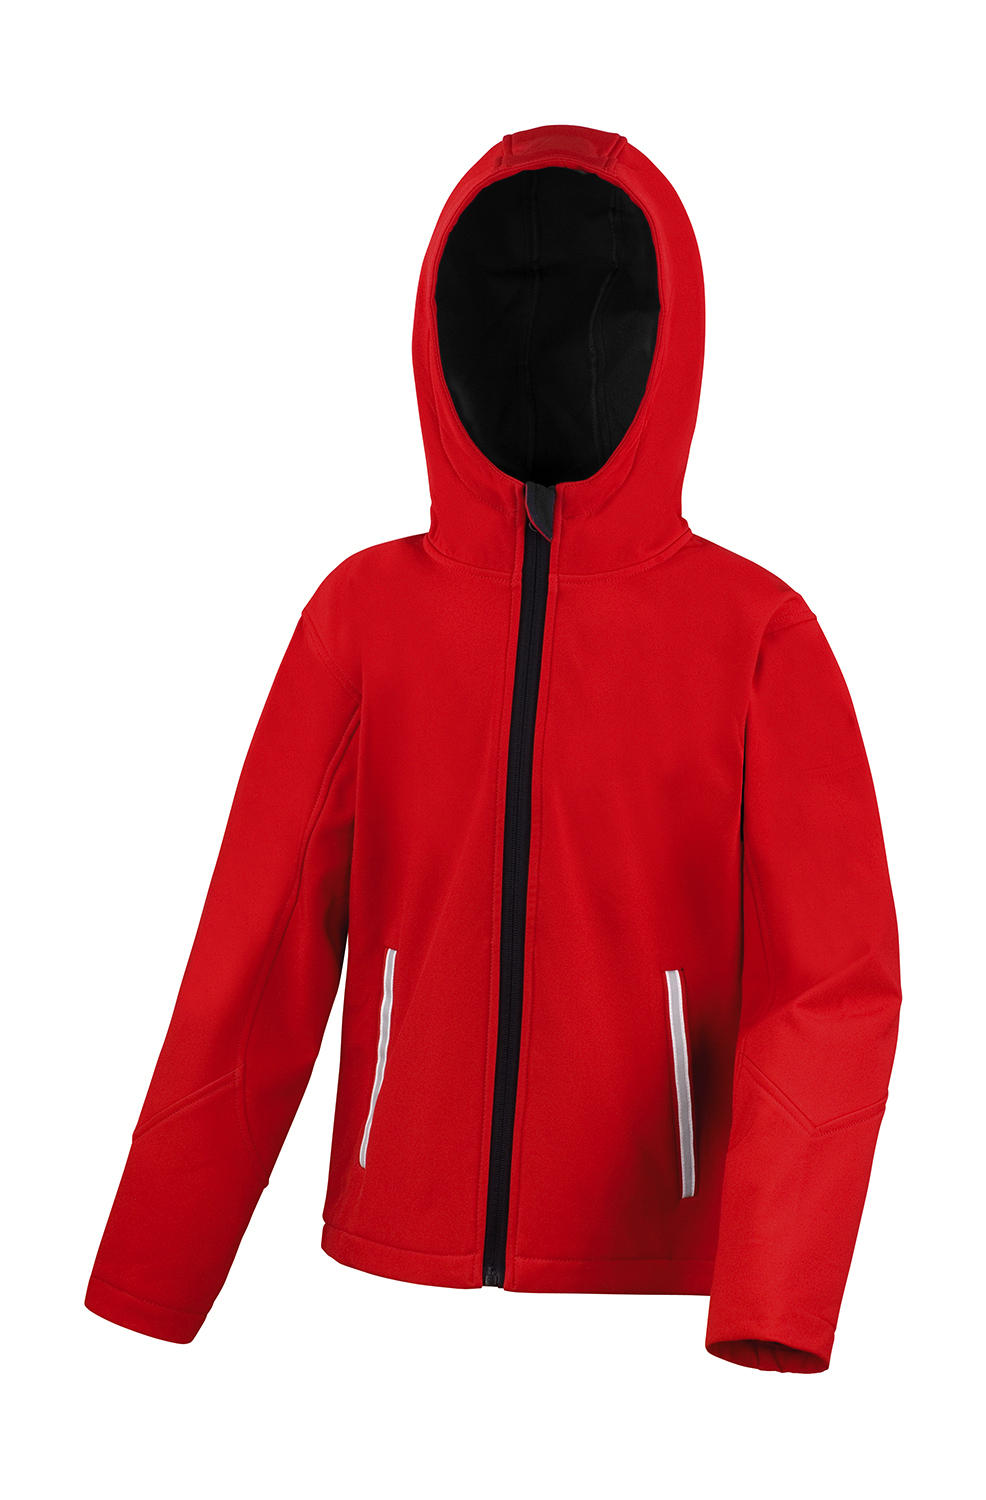  Kids TX Performance Hooded Softshell Jacket in Farbe Red/Black